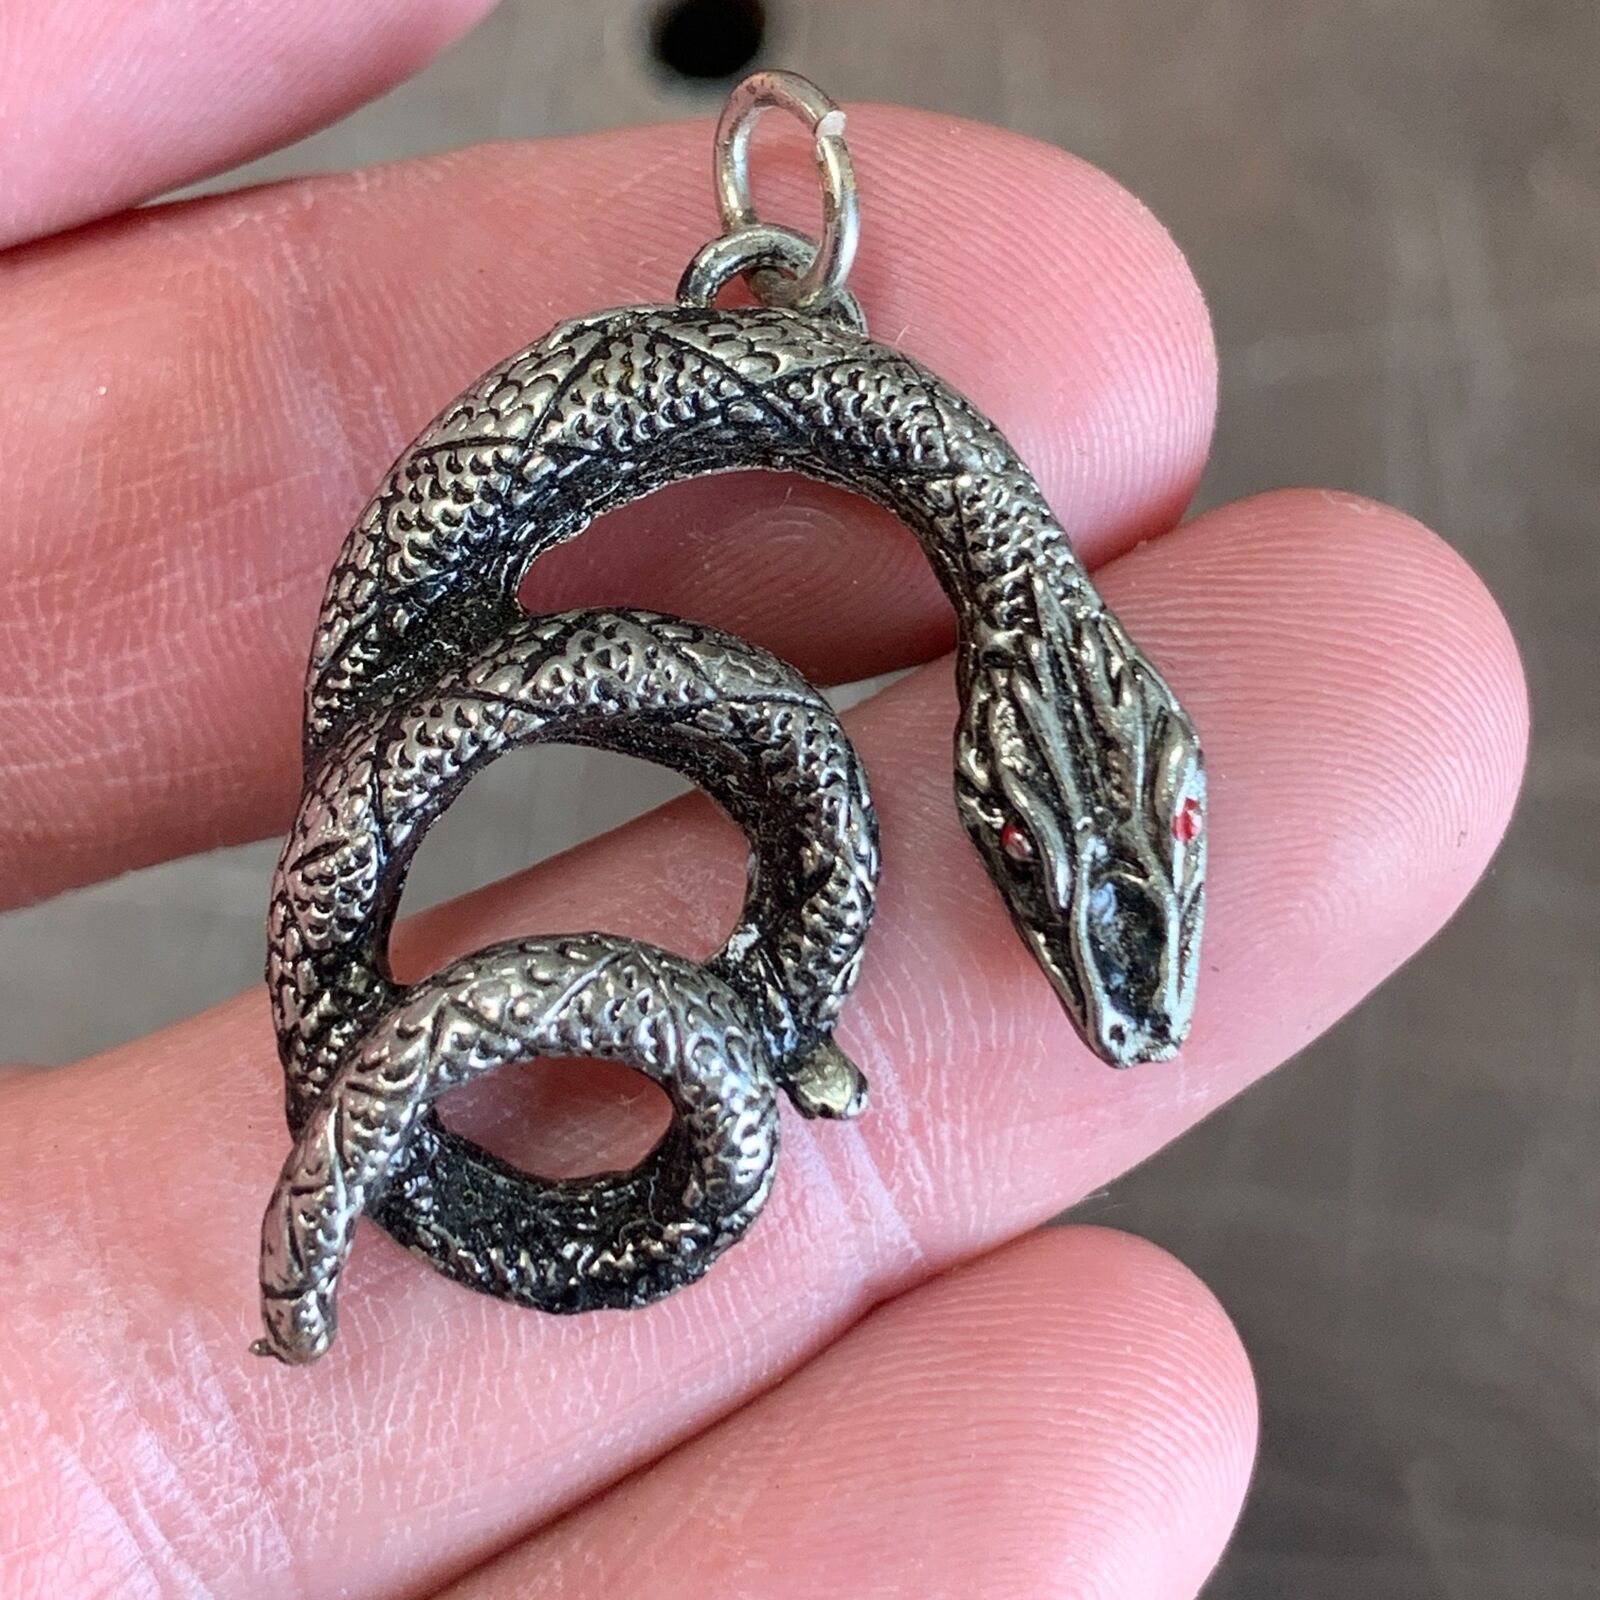 VTG c.1980s Silvertone Heavy Metal Coiled Snake Necklace Charm w/ Red Eyes